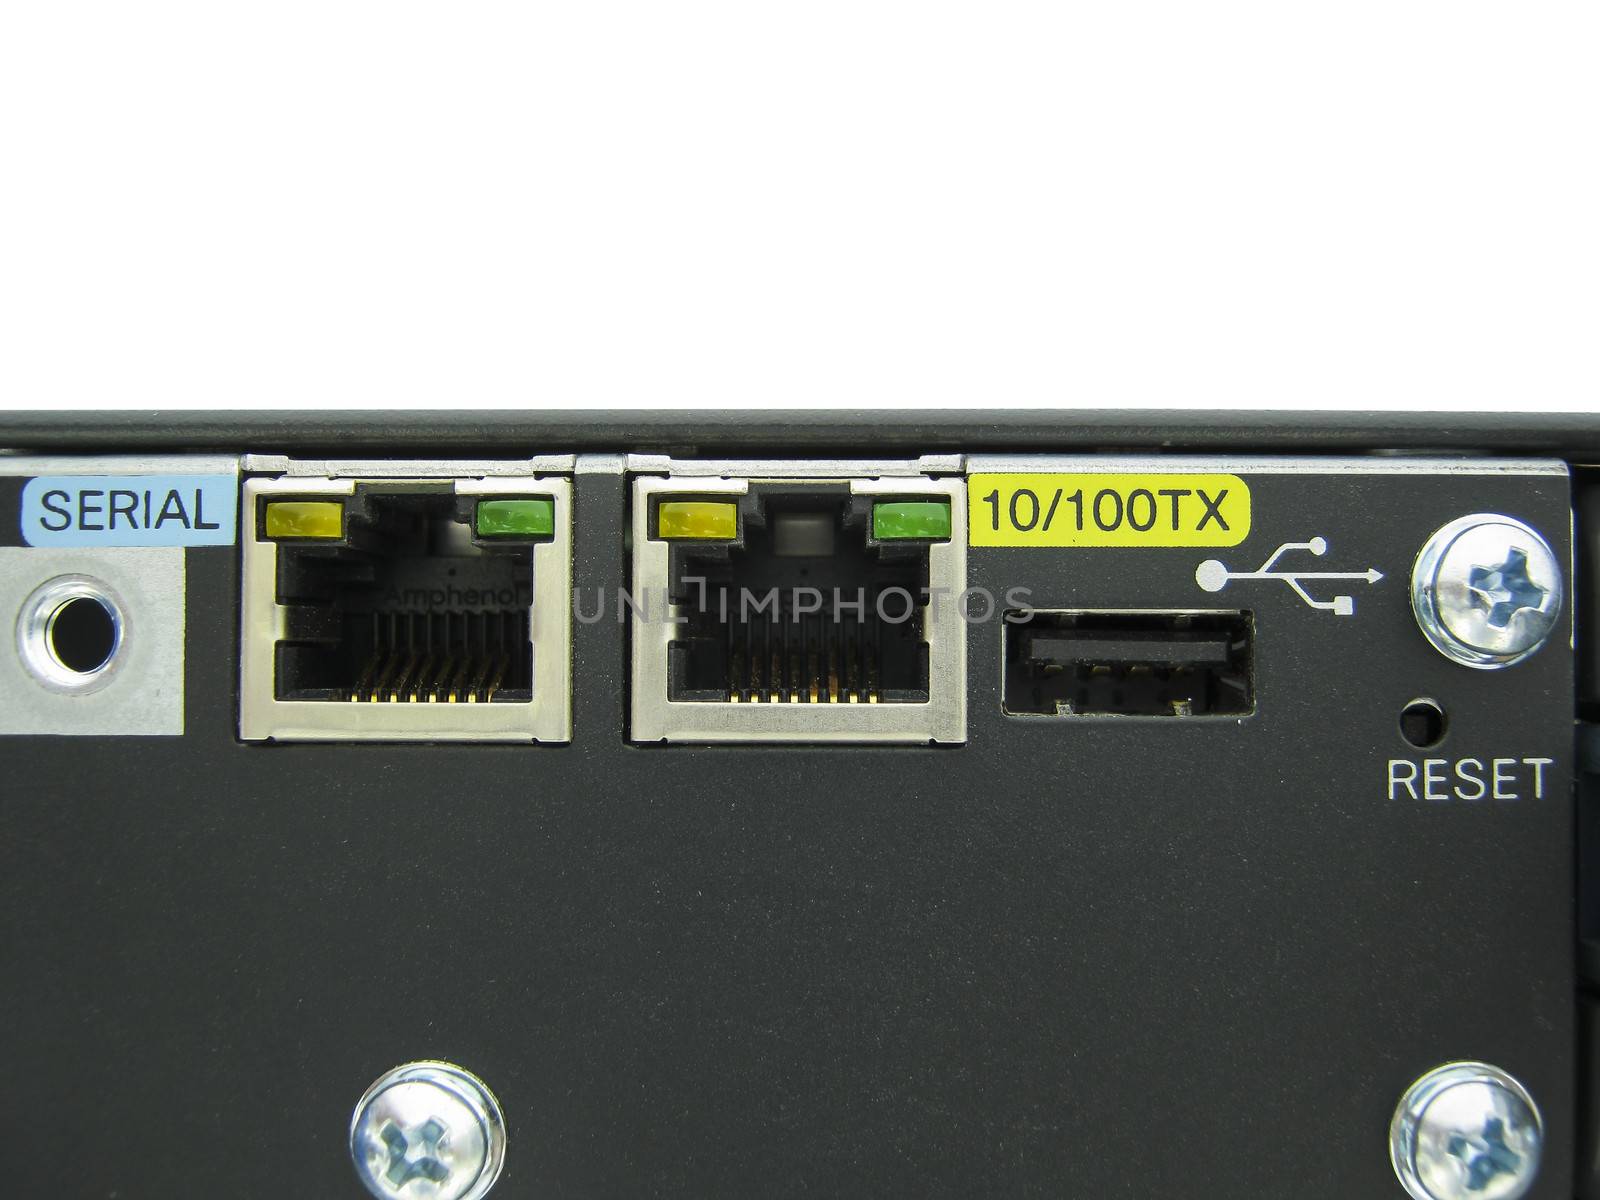 Port console of a ethernet with USB port